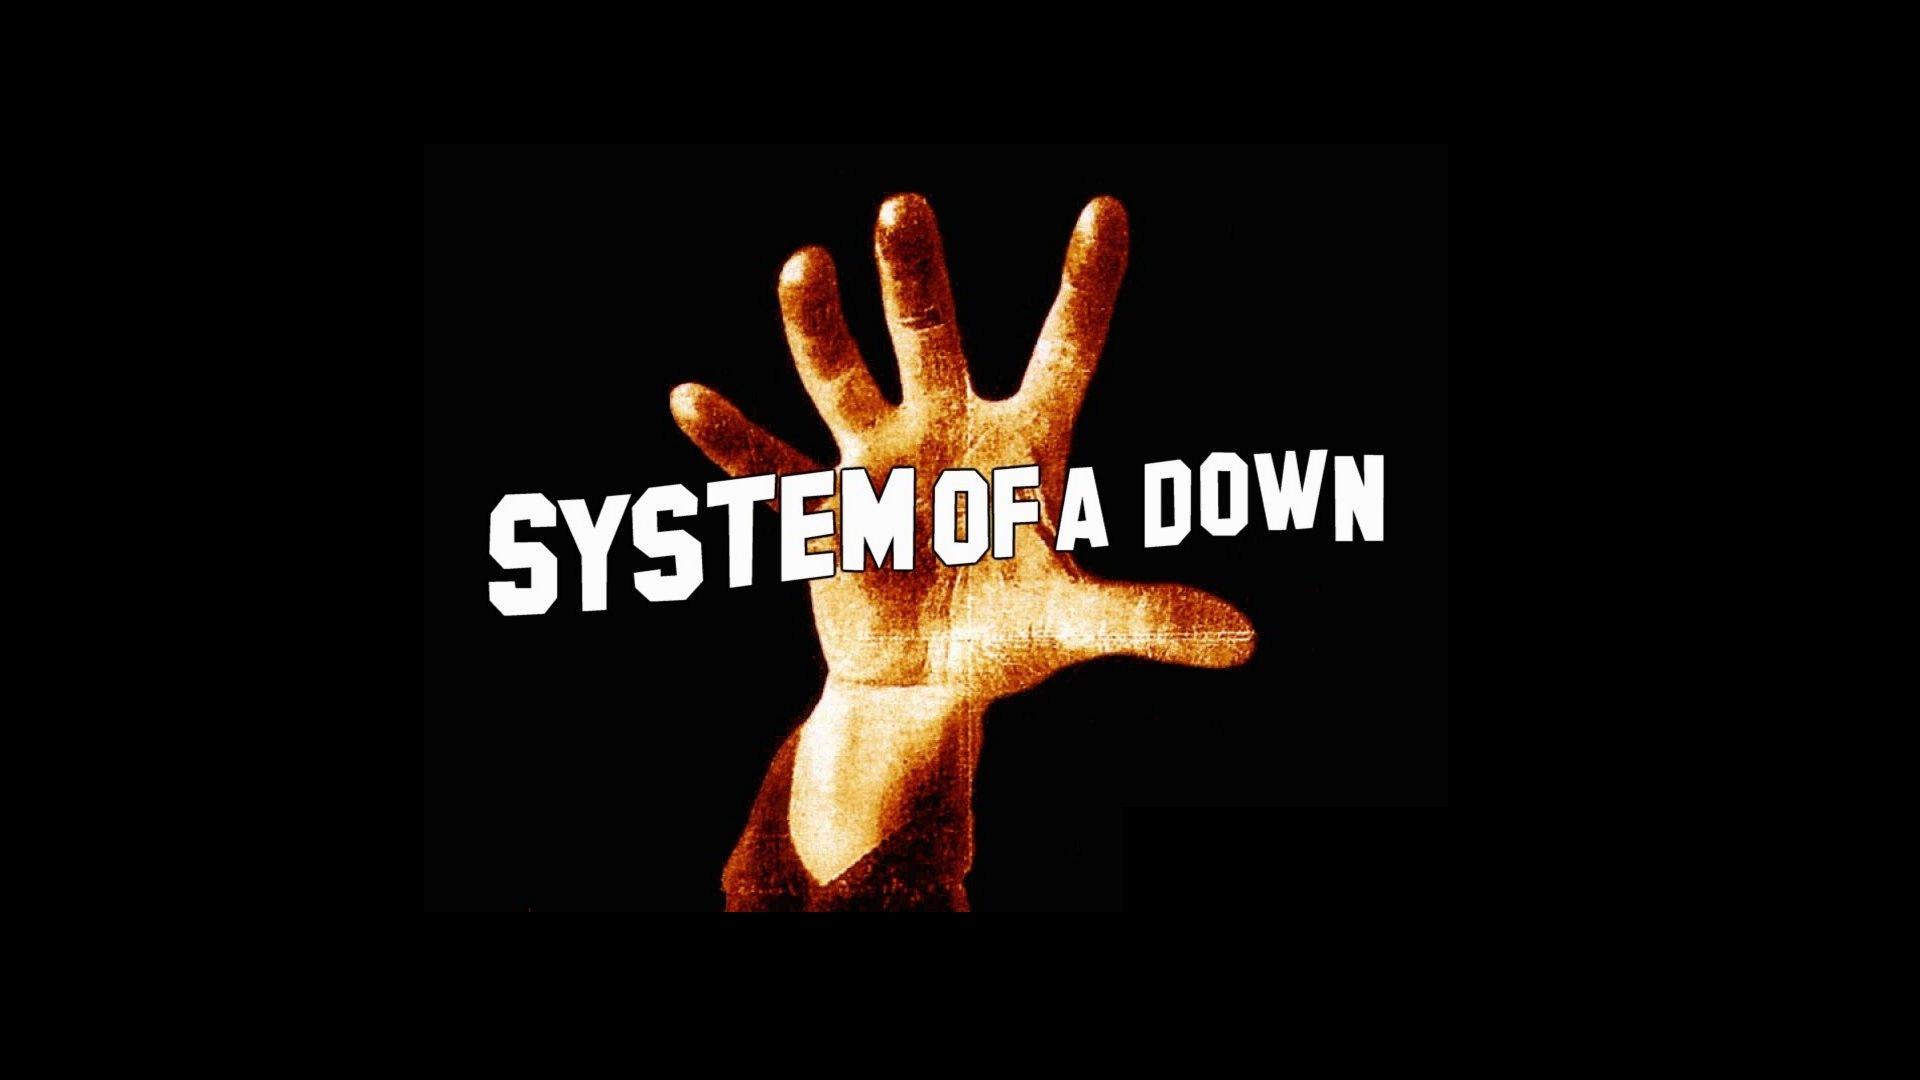 Music system of a down wallpaper. PC